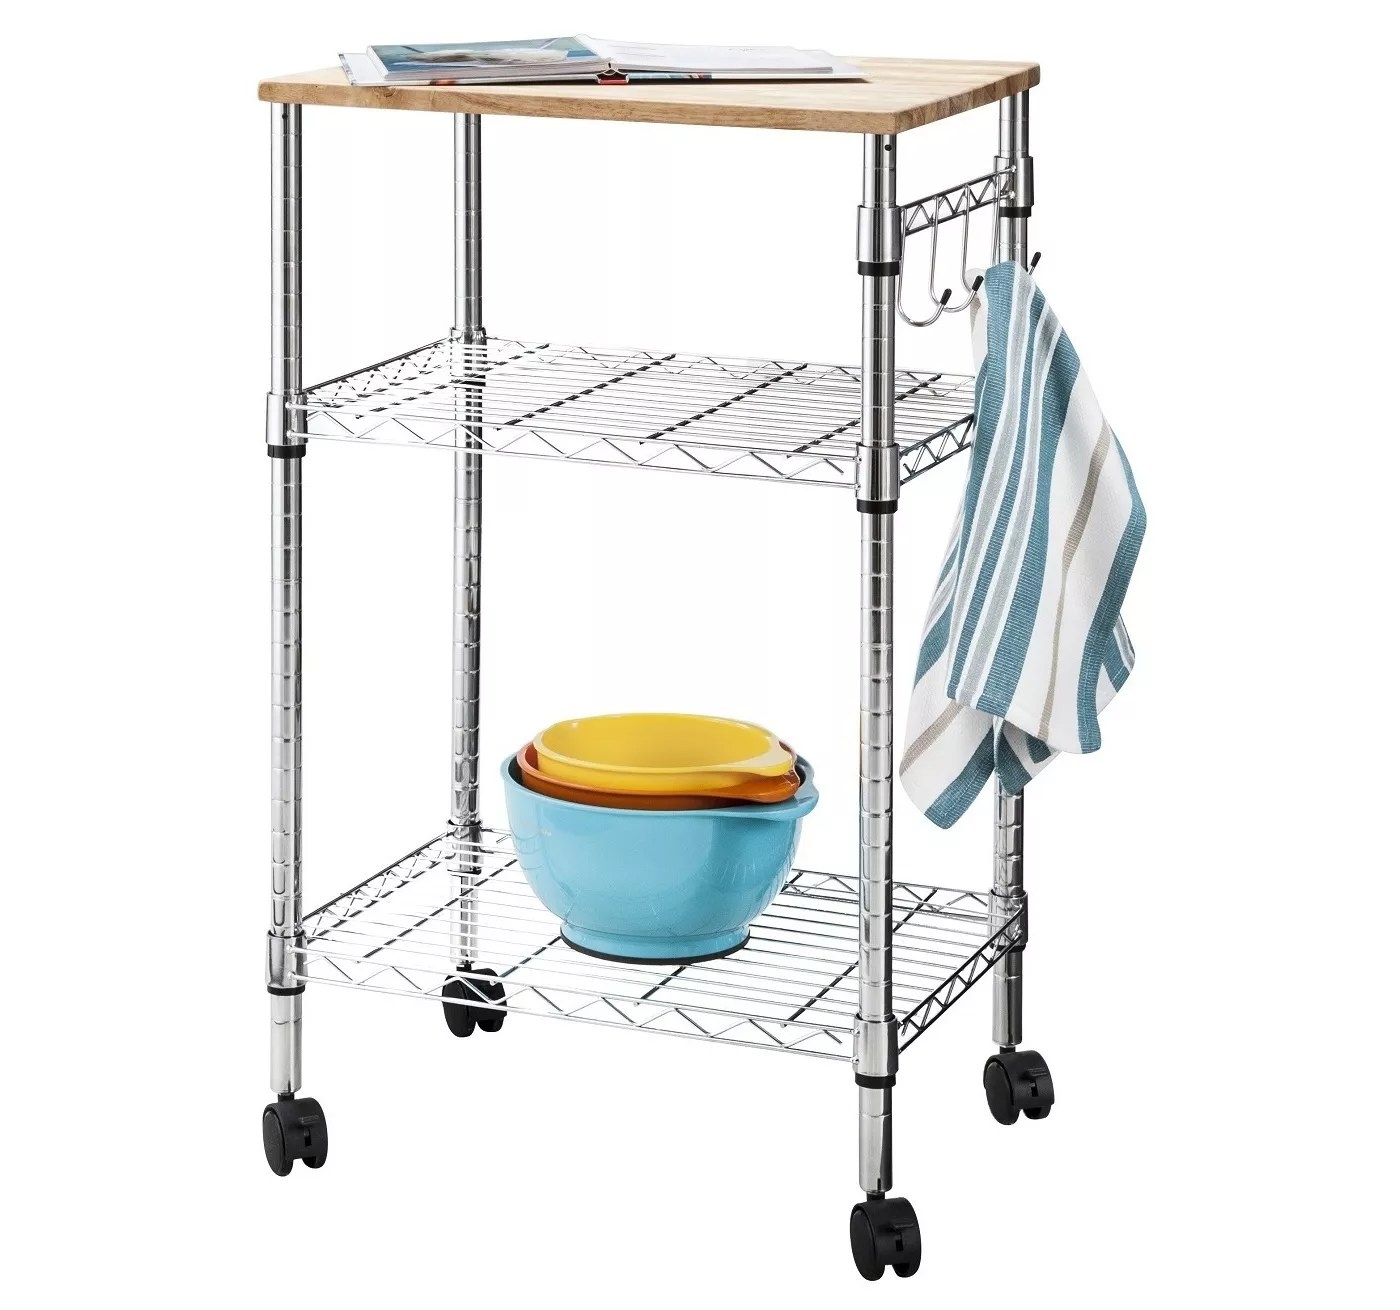 The cart on wheels with two open shelves, a wooden top, and four hooks on the side